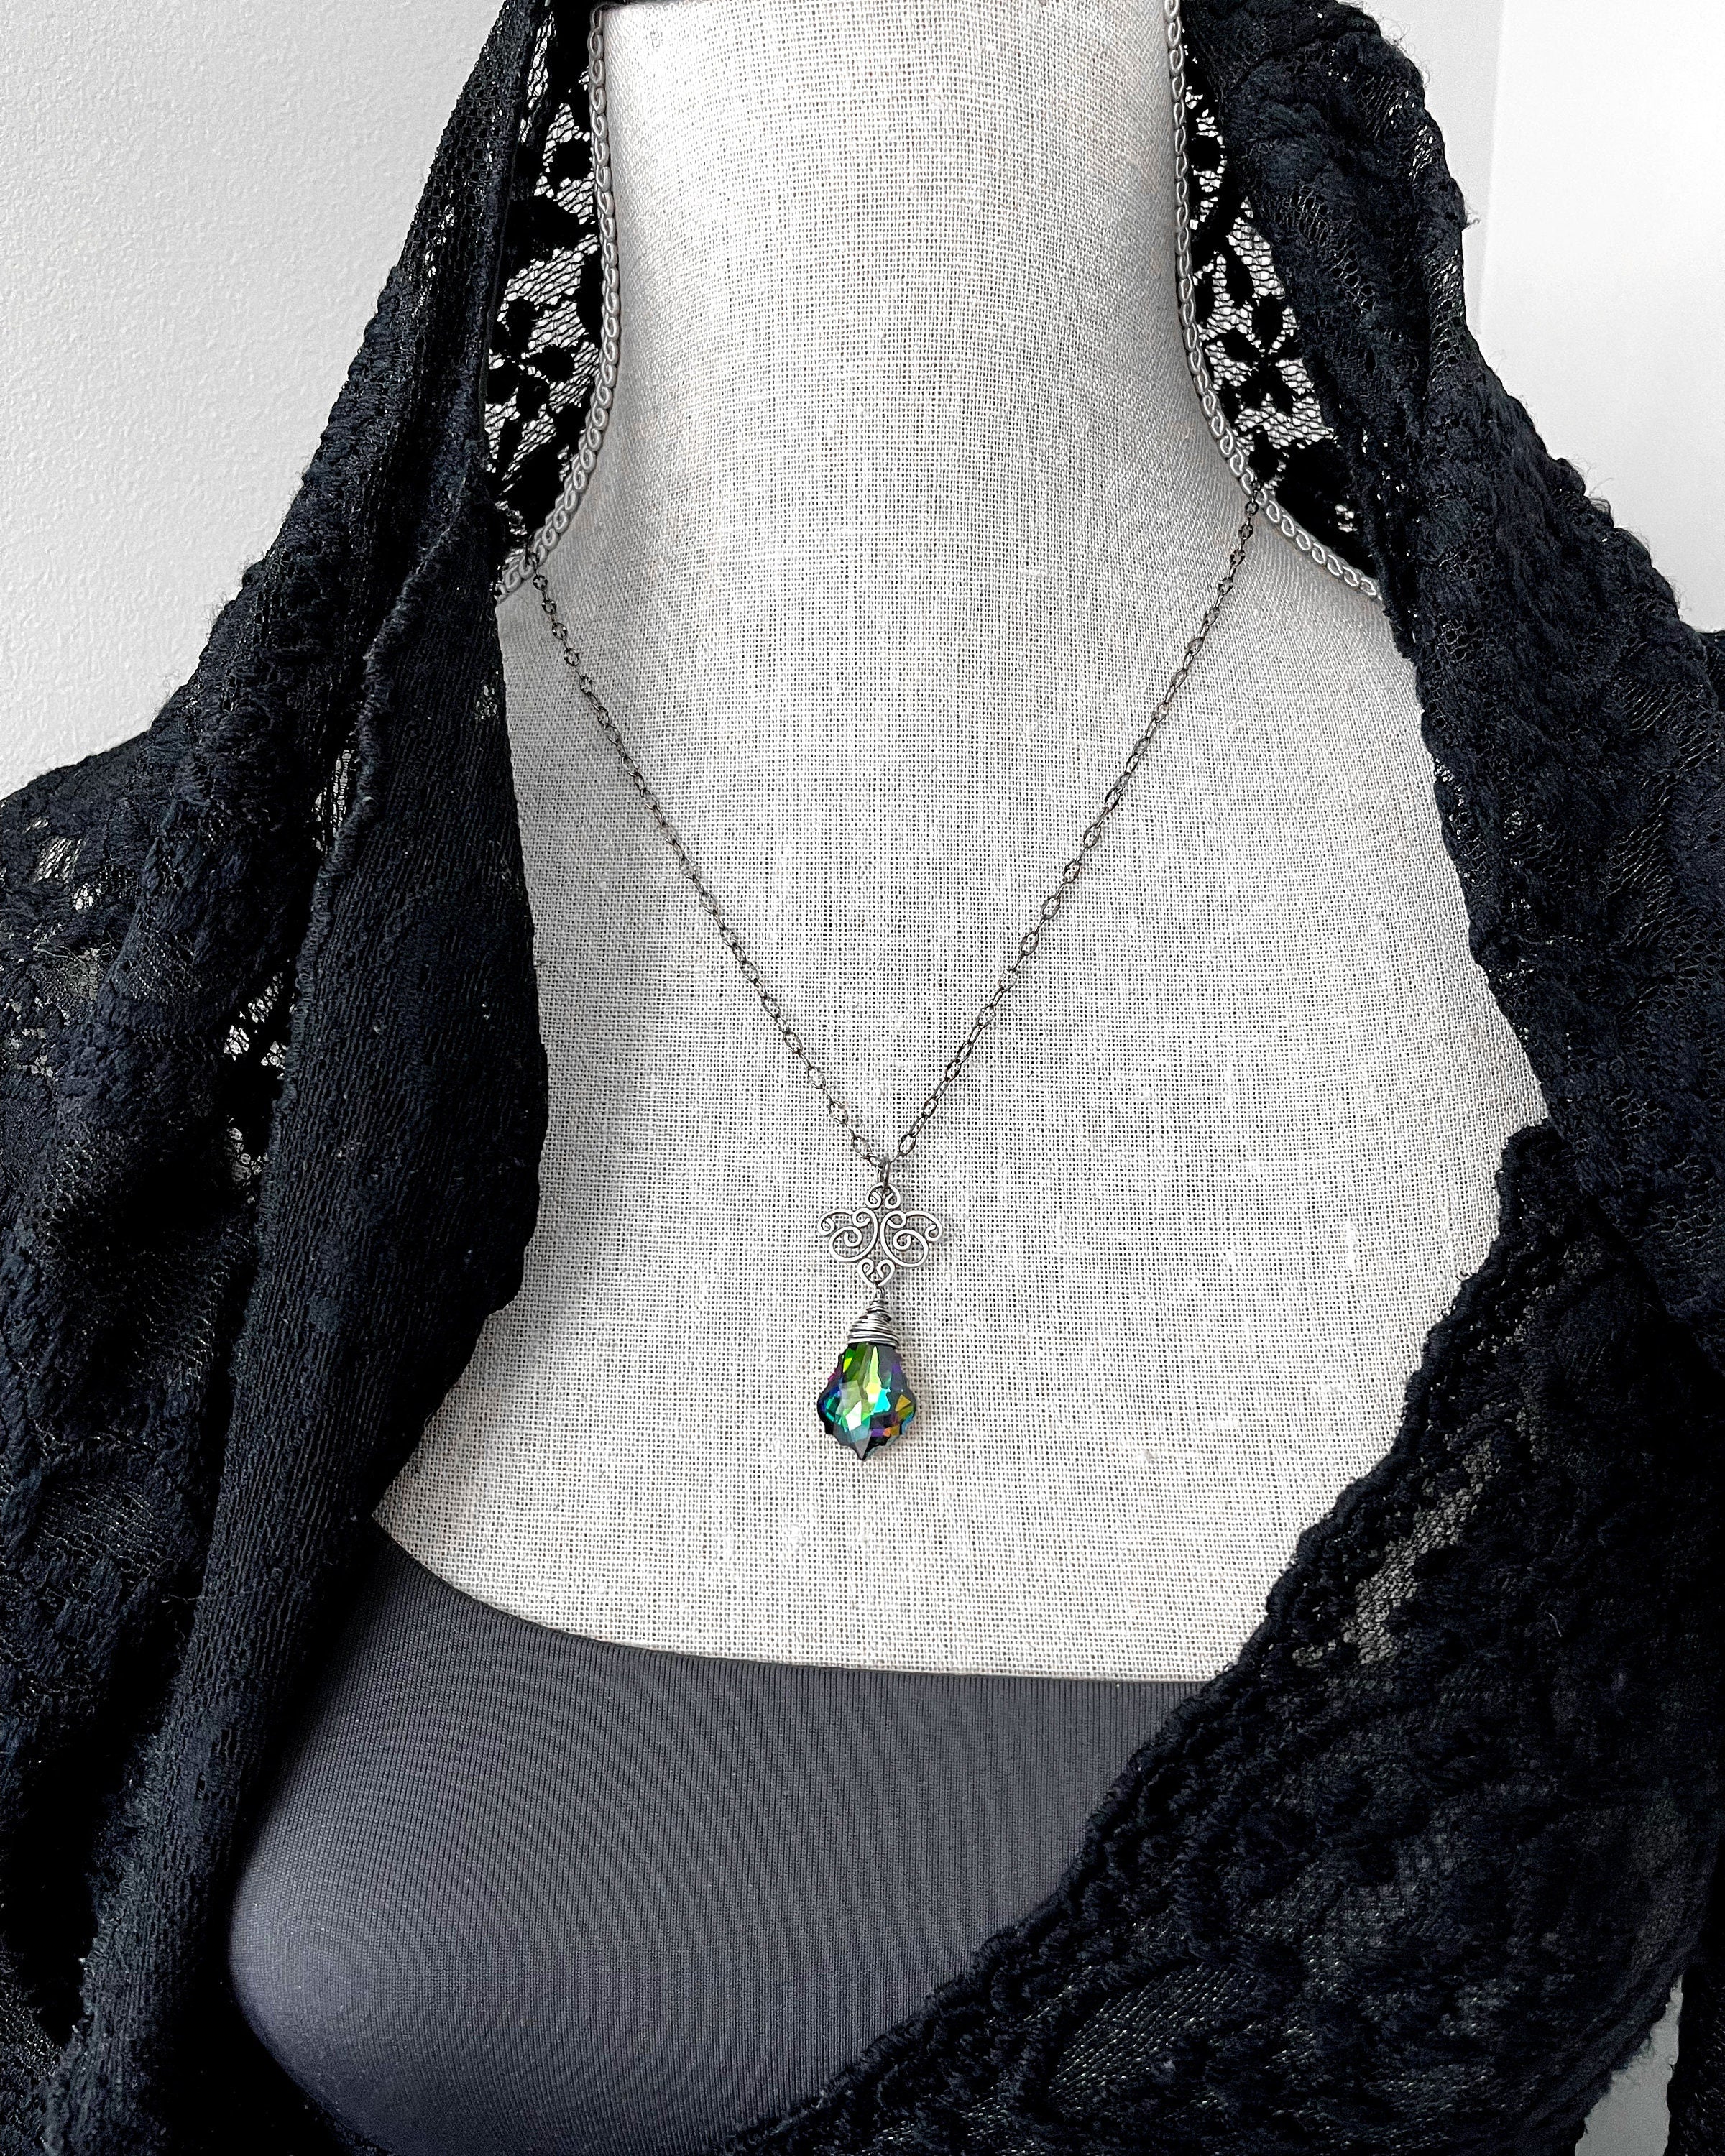 Good WITCH, Bad WITCH: Wicked Swarovski Crystal Necklace in Deep Green, Violet, Magenta, Blue - Wicked Witch Goth Gothic Halloween Jewelry